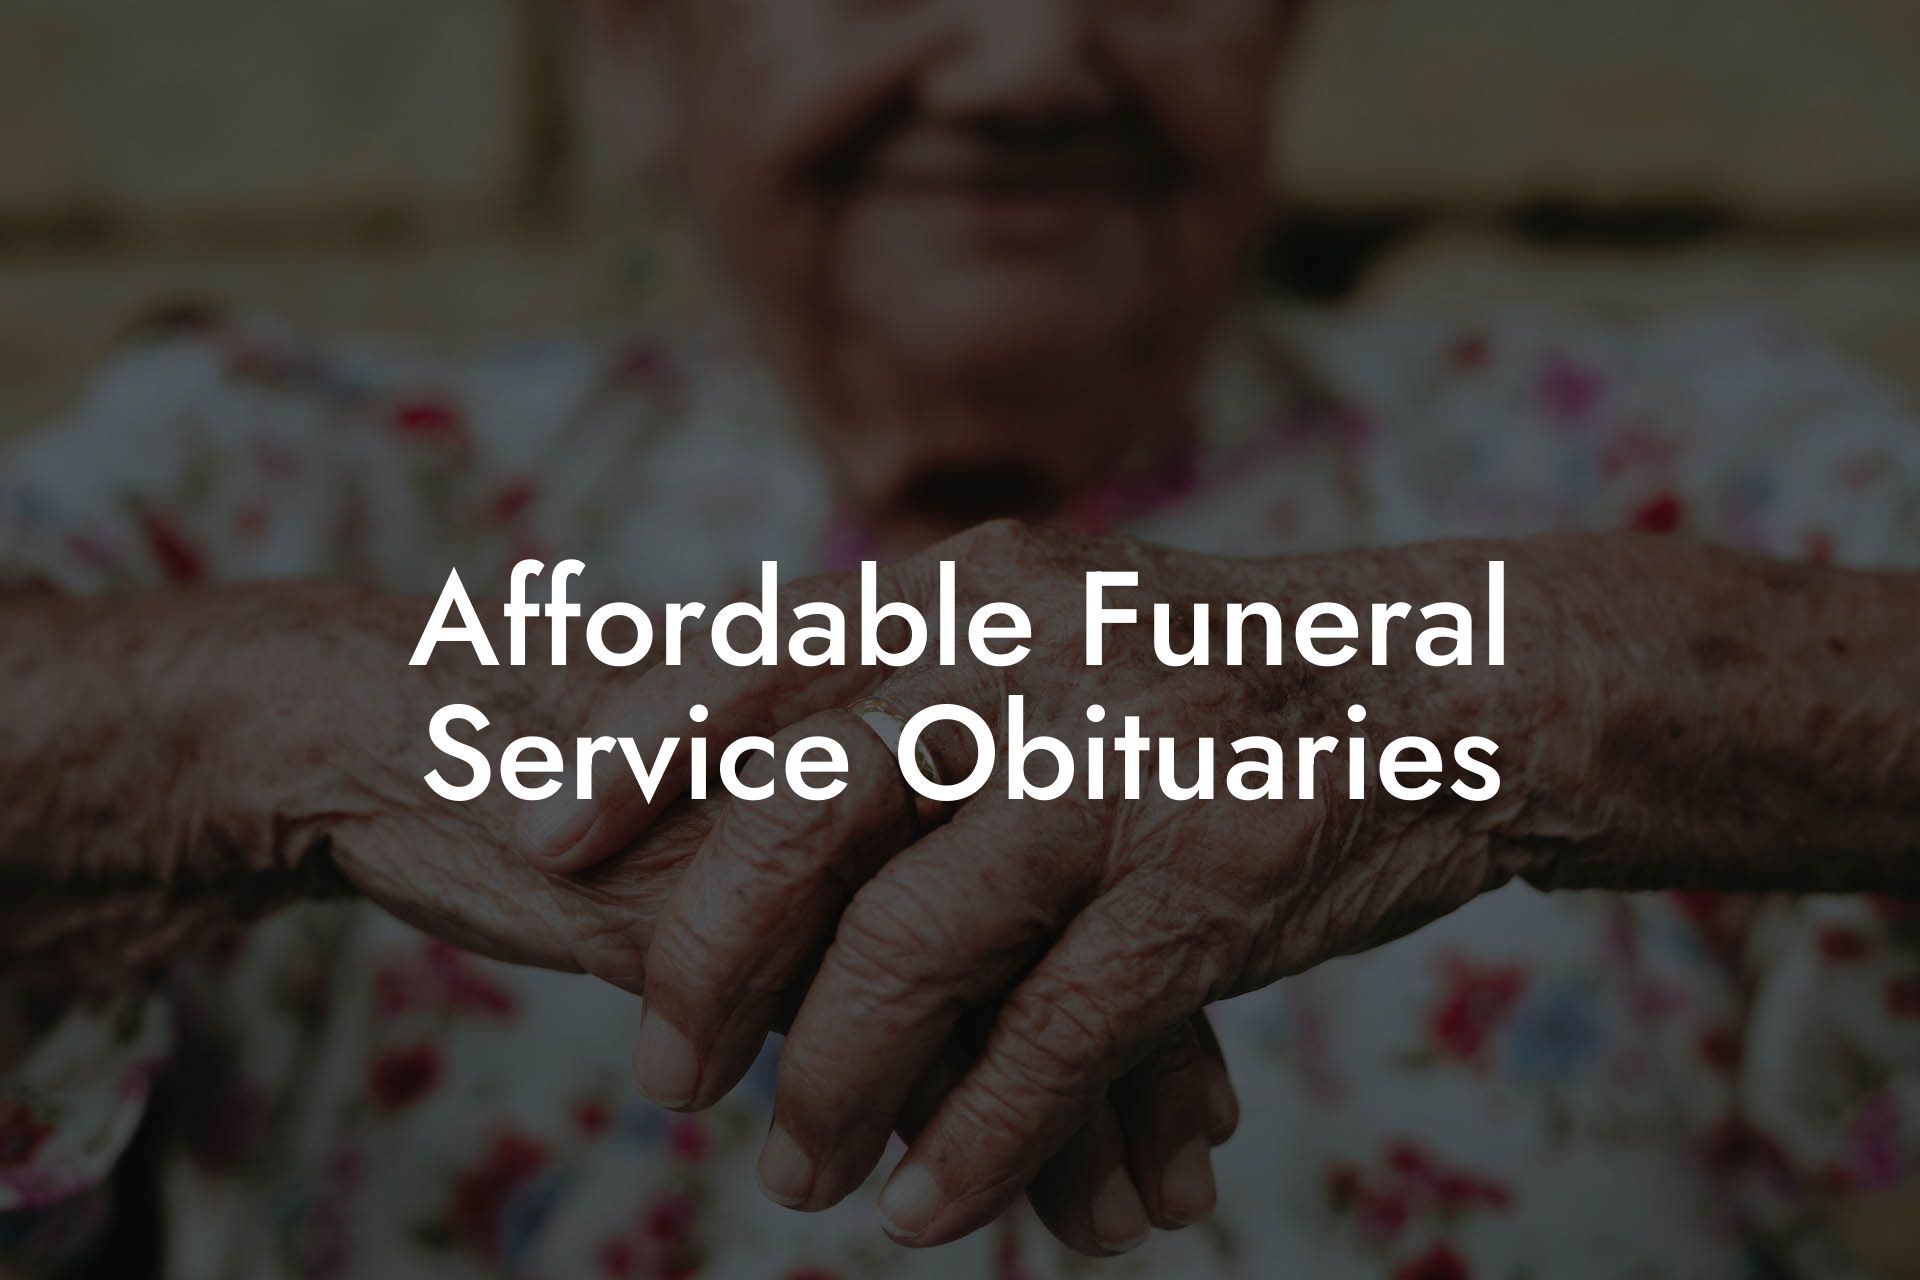 Affordable Funeral Service Obituaries